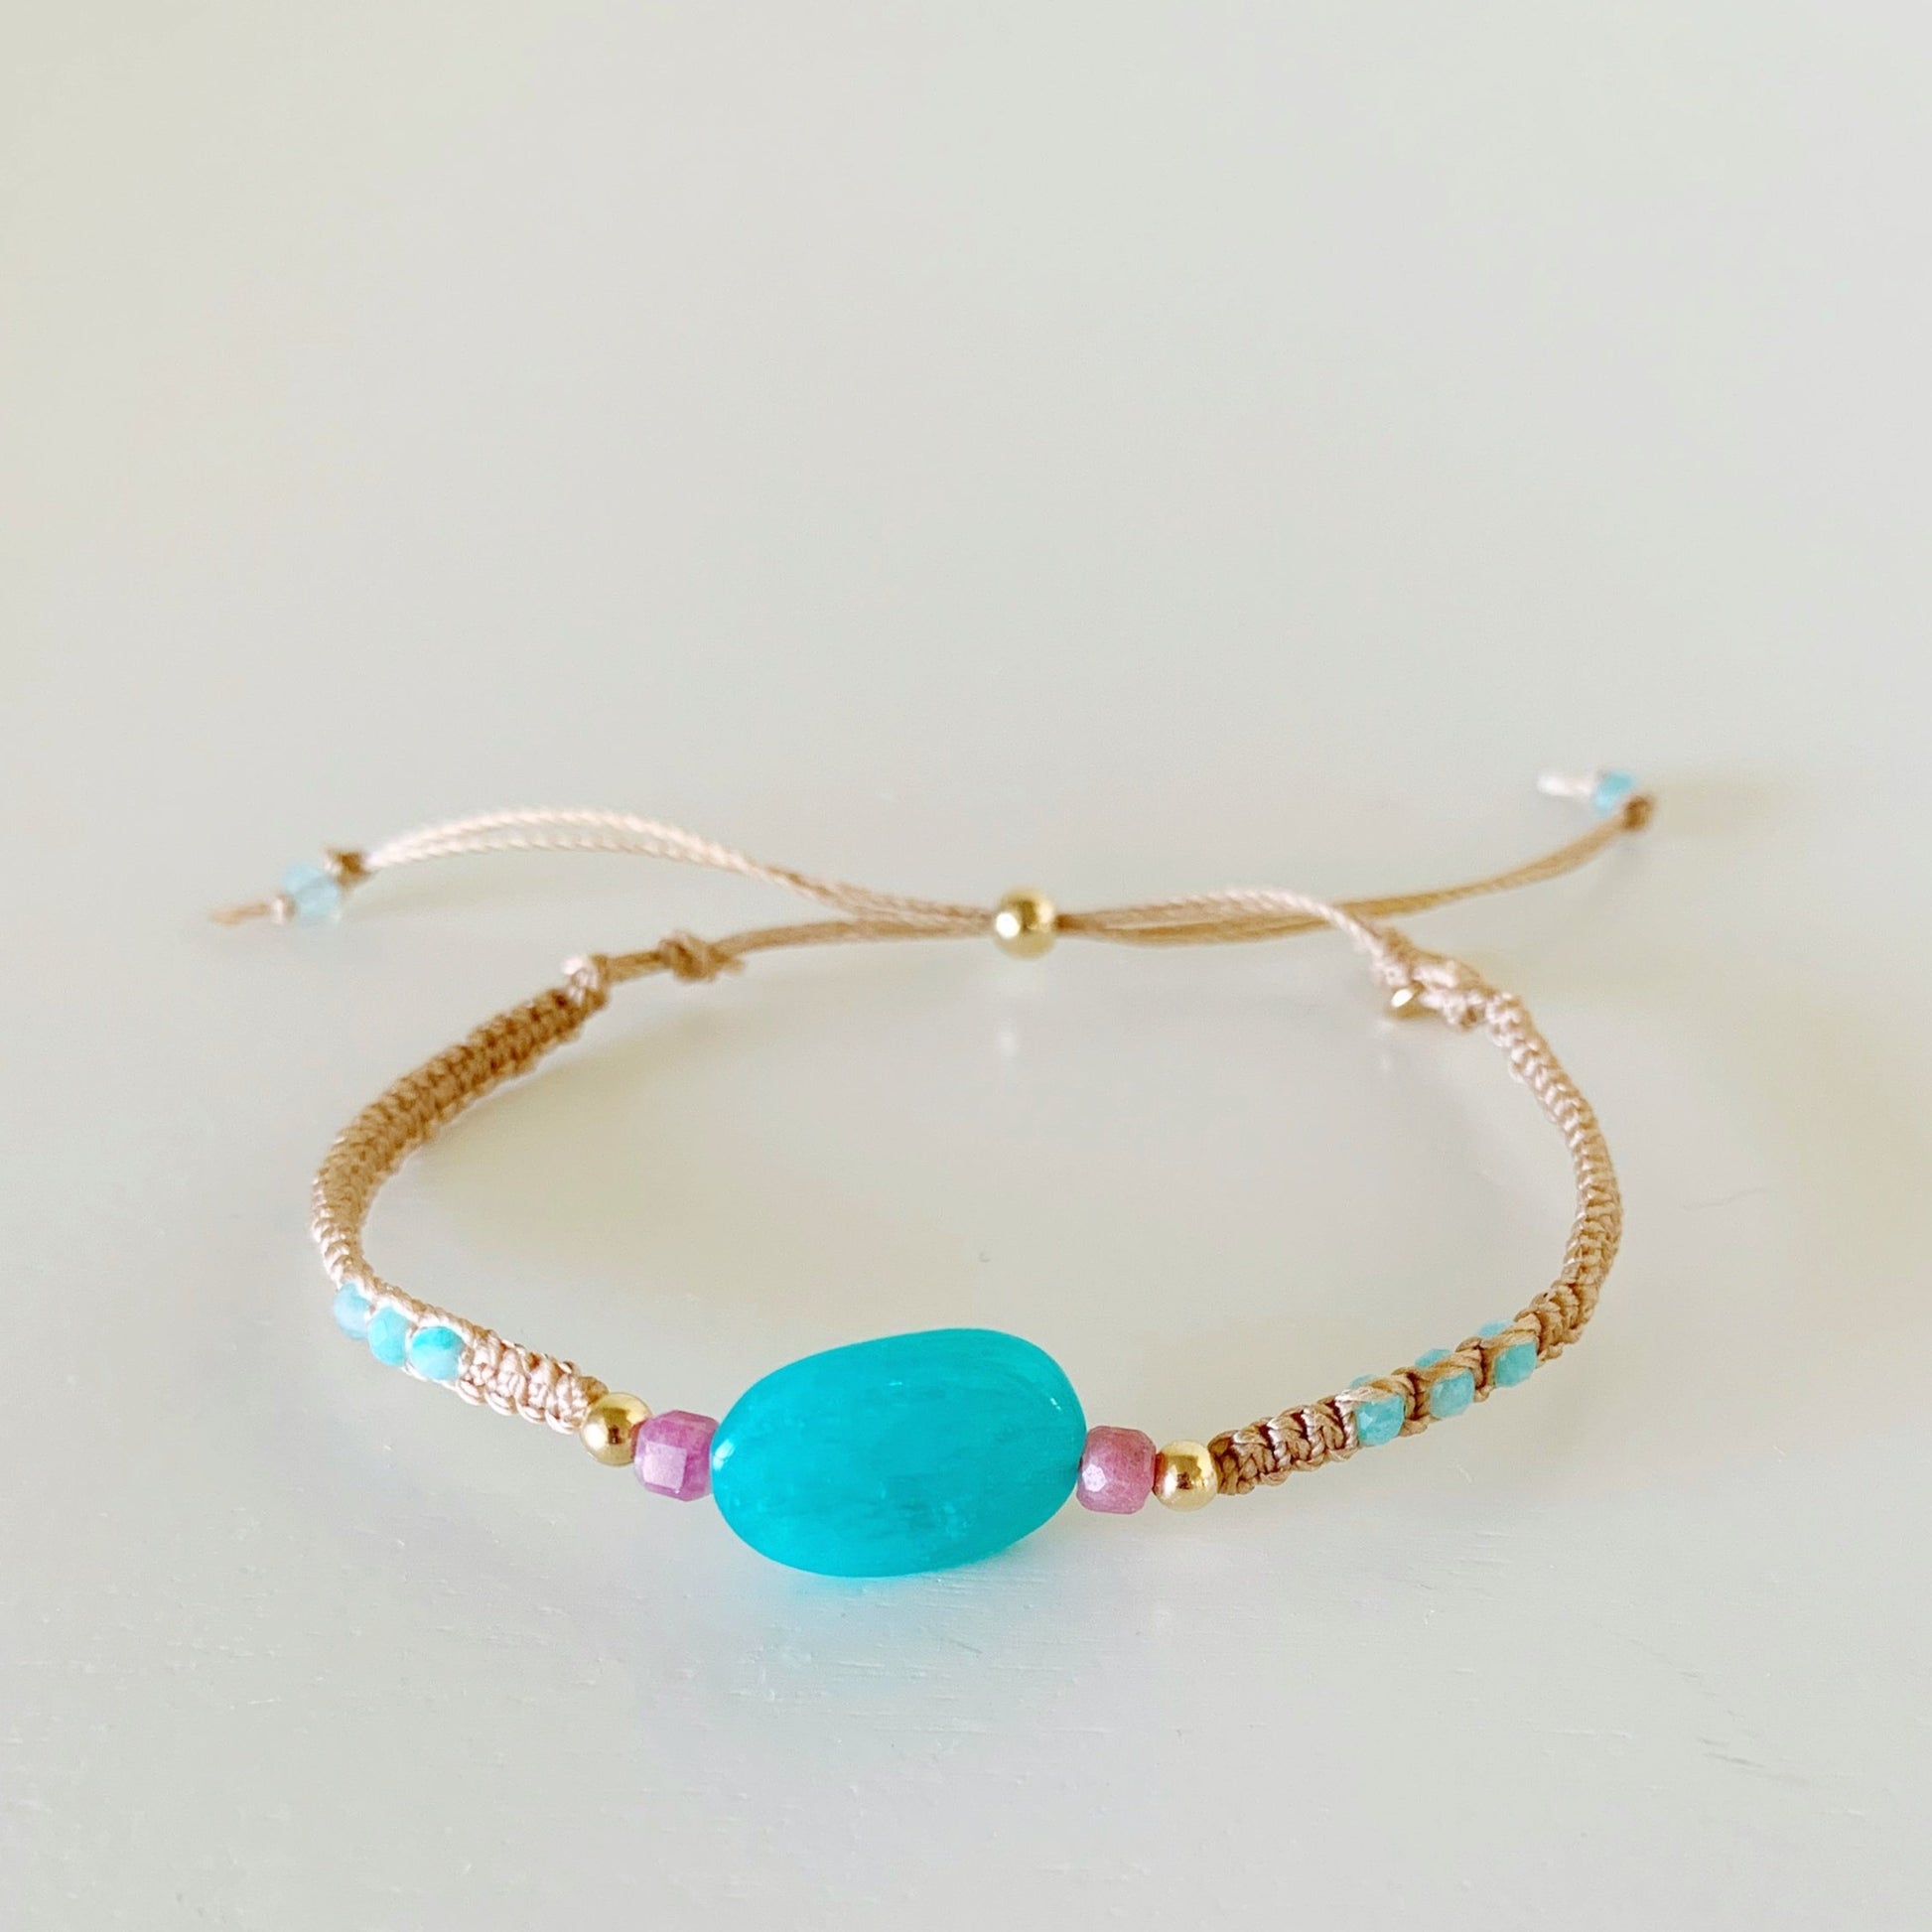 the harwich port adjustable macrame bracelet by mermaids and madeleines in color moonlit beach is created in a friendship style bracelet with light tan color cord and a slide bead clasp. this bracelet features a bright amazonite bead at the center with smaller amazonite rondelles on the sides and complimented by pink tourmaline and 14k gold filled beads. this bracelet is facing forward and is photographed on a flat white surface